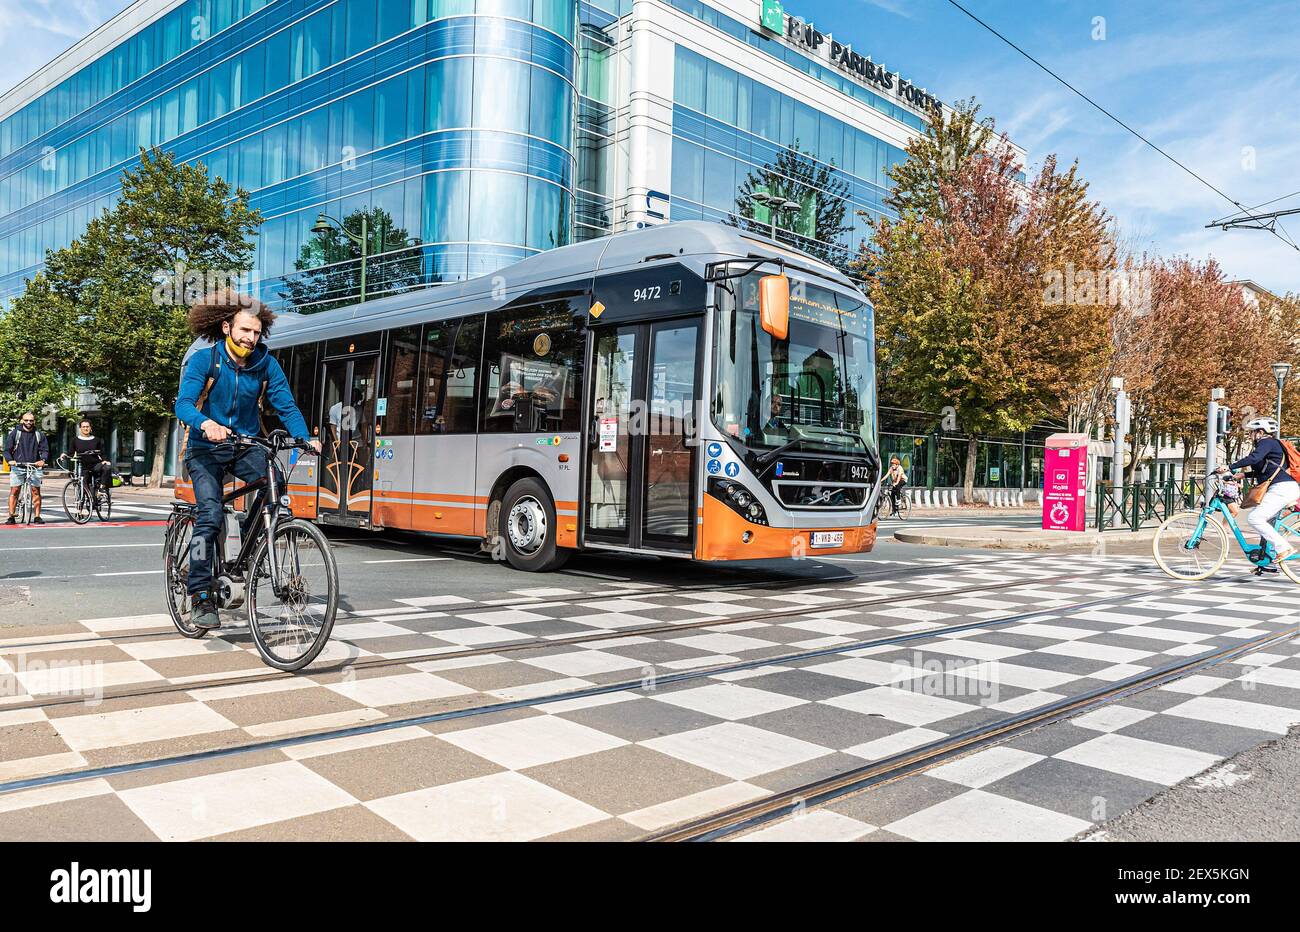 Maghreb man with curling hair and an Urban bus at the car free sunday Stock Photo